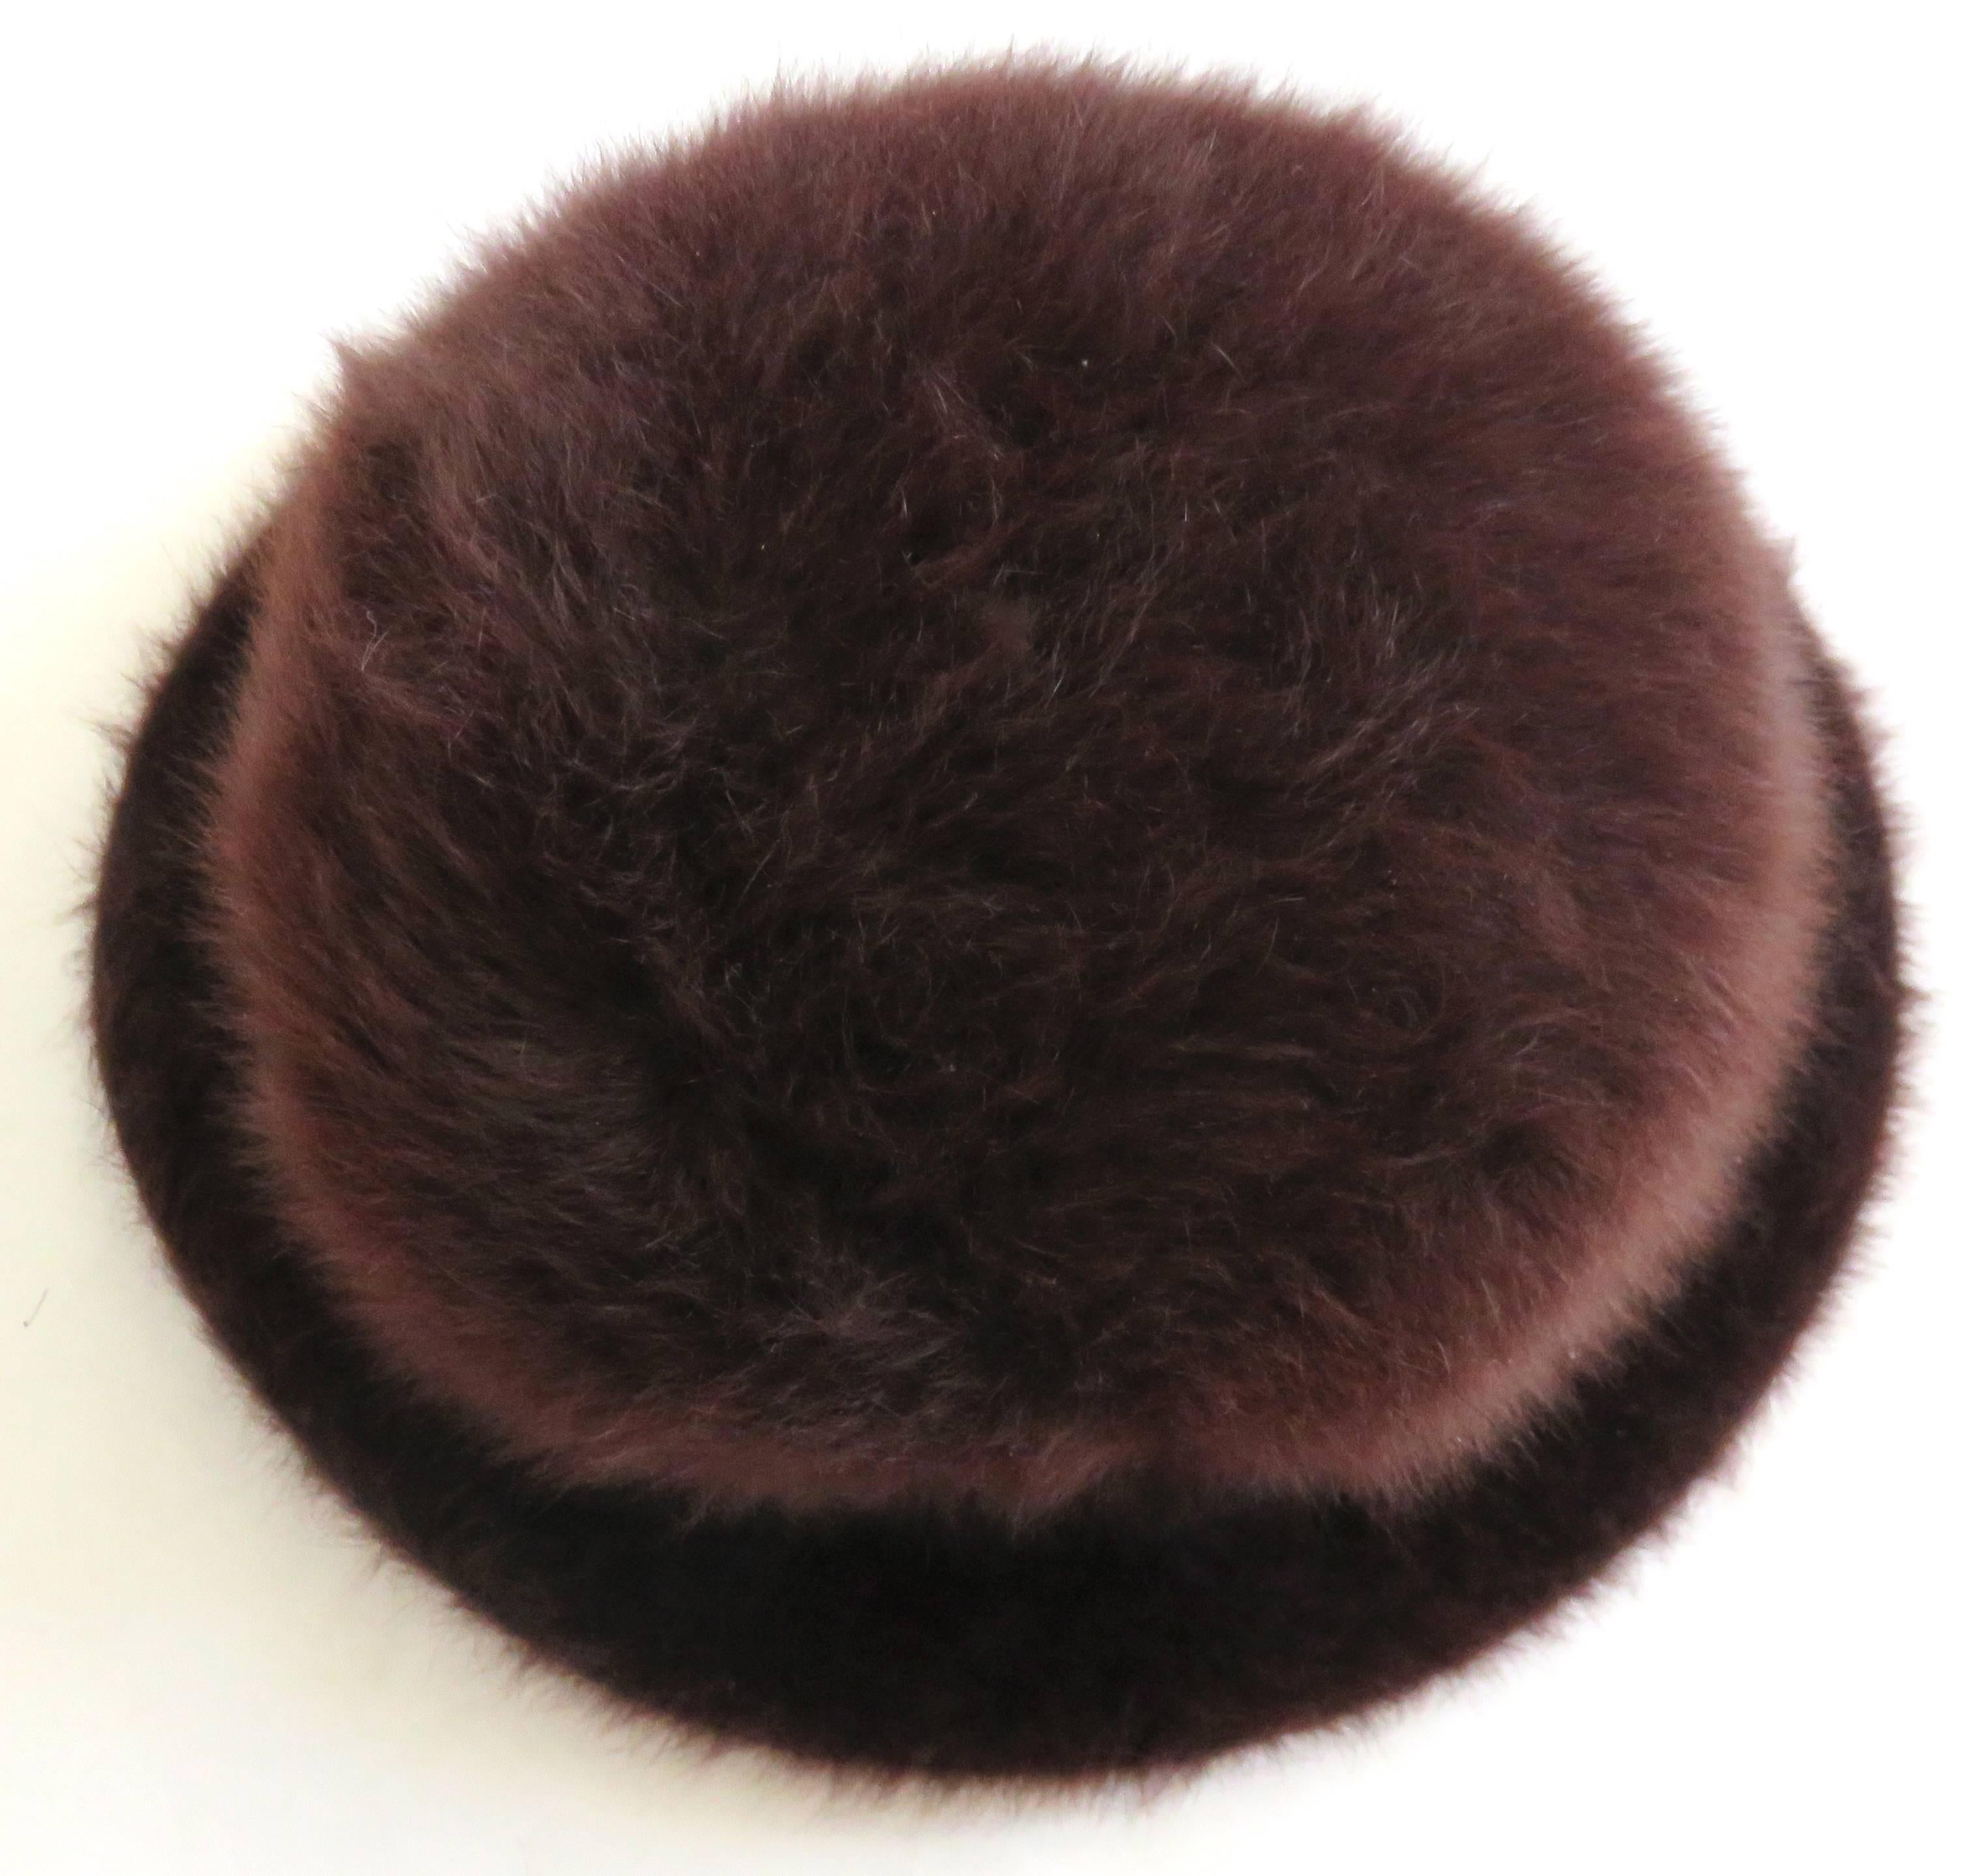 PHILIP TREACY Mohair bowler hat  - worn once 1